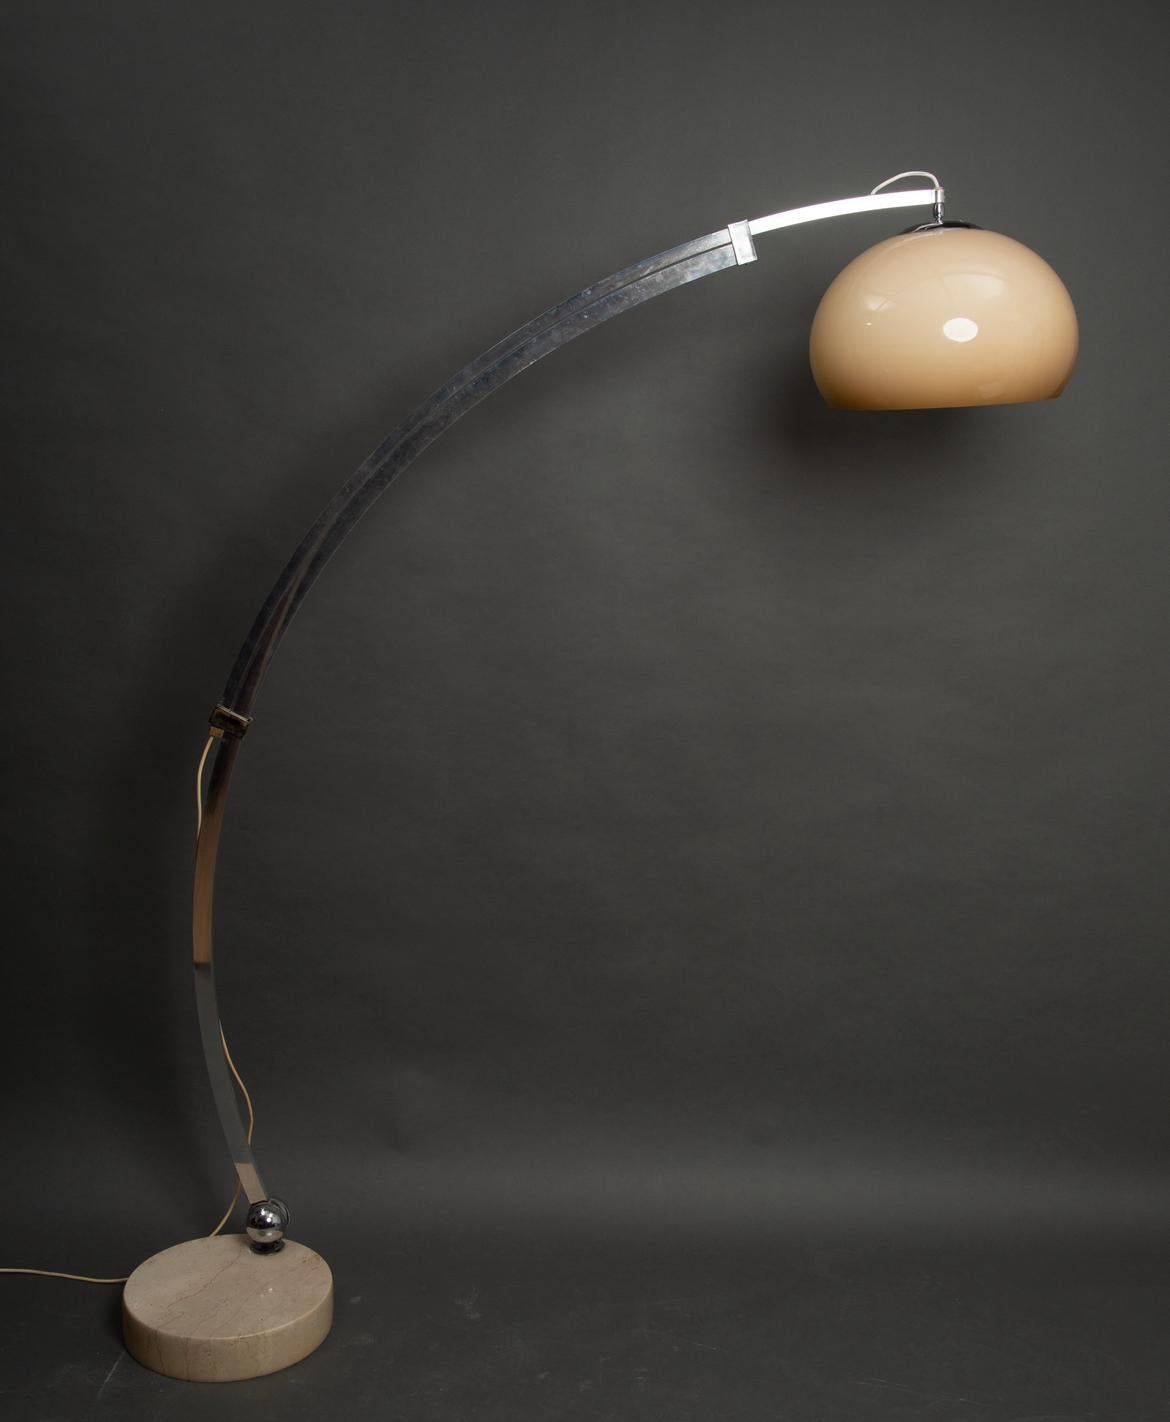 A 1970s arched floor lamp, consisting of a marble base, an extendable chrome metal shaft, and a molded plastic lampshade in a gradient coffee color. In good preservation and working condition. Dimensions: H: 192 cm.

Harvey Guzzini is often